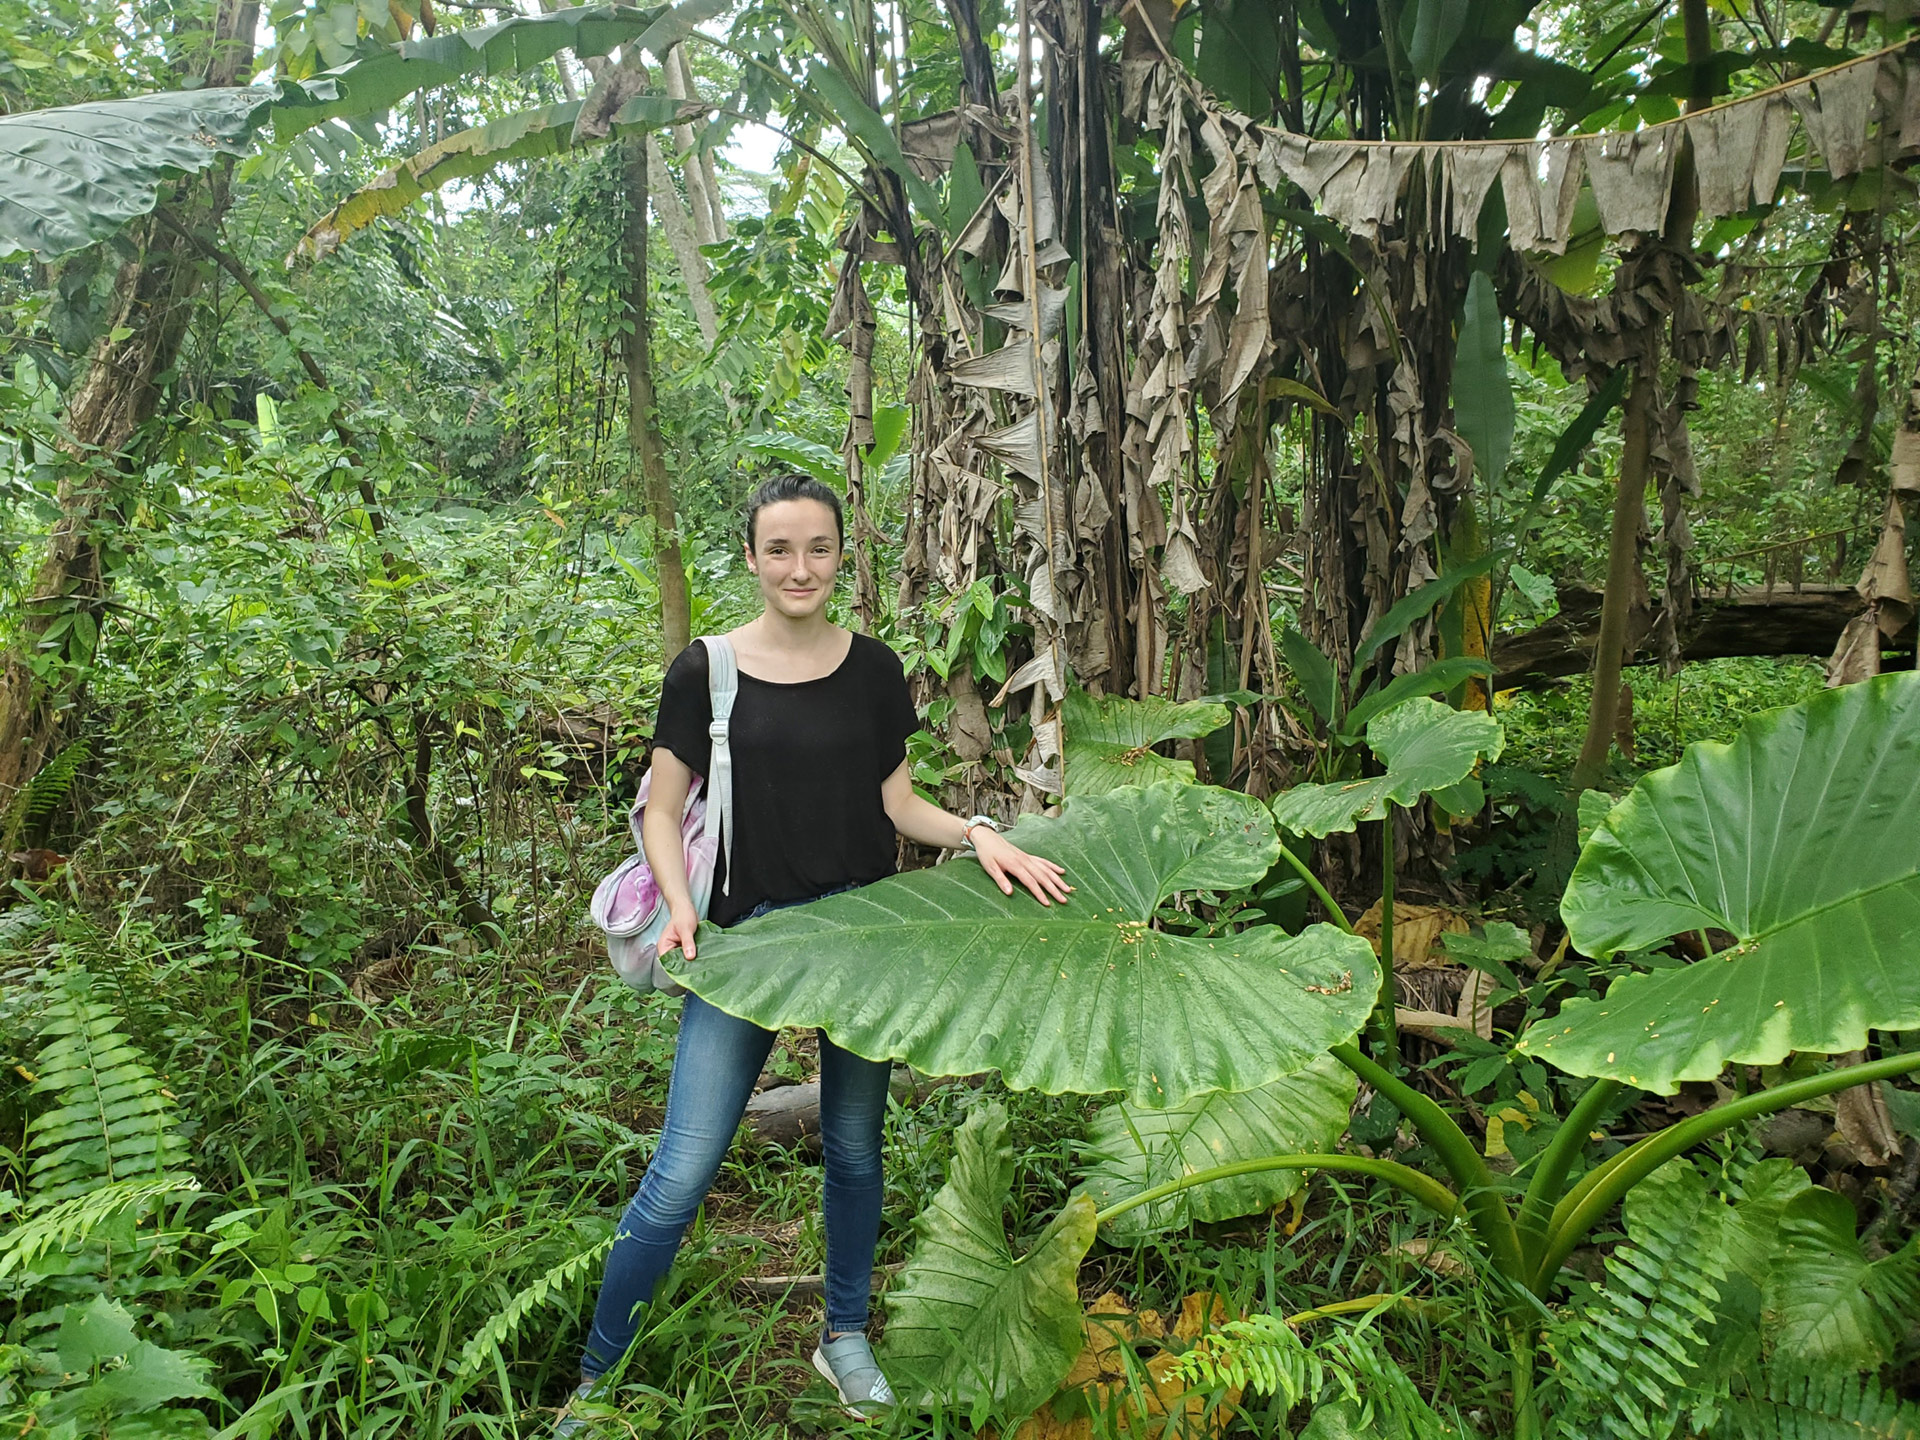 Samantha Miller traveling with the Watson Foundation